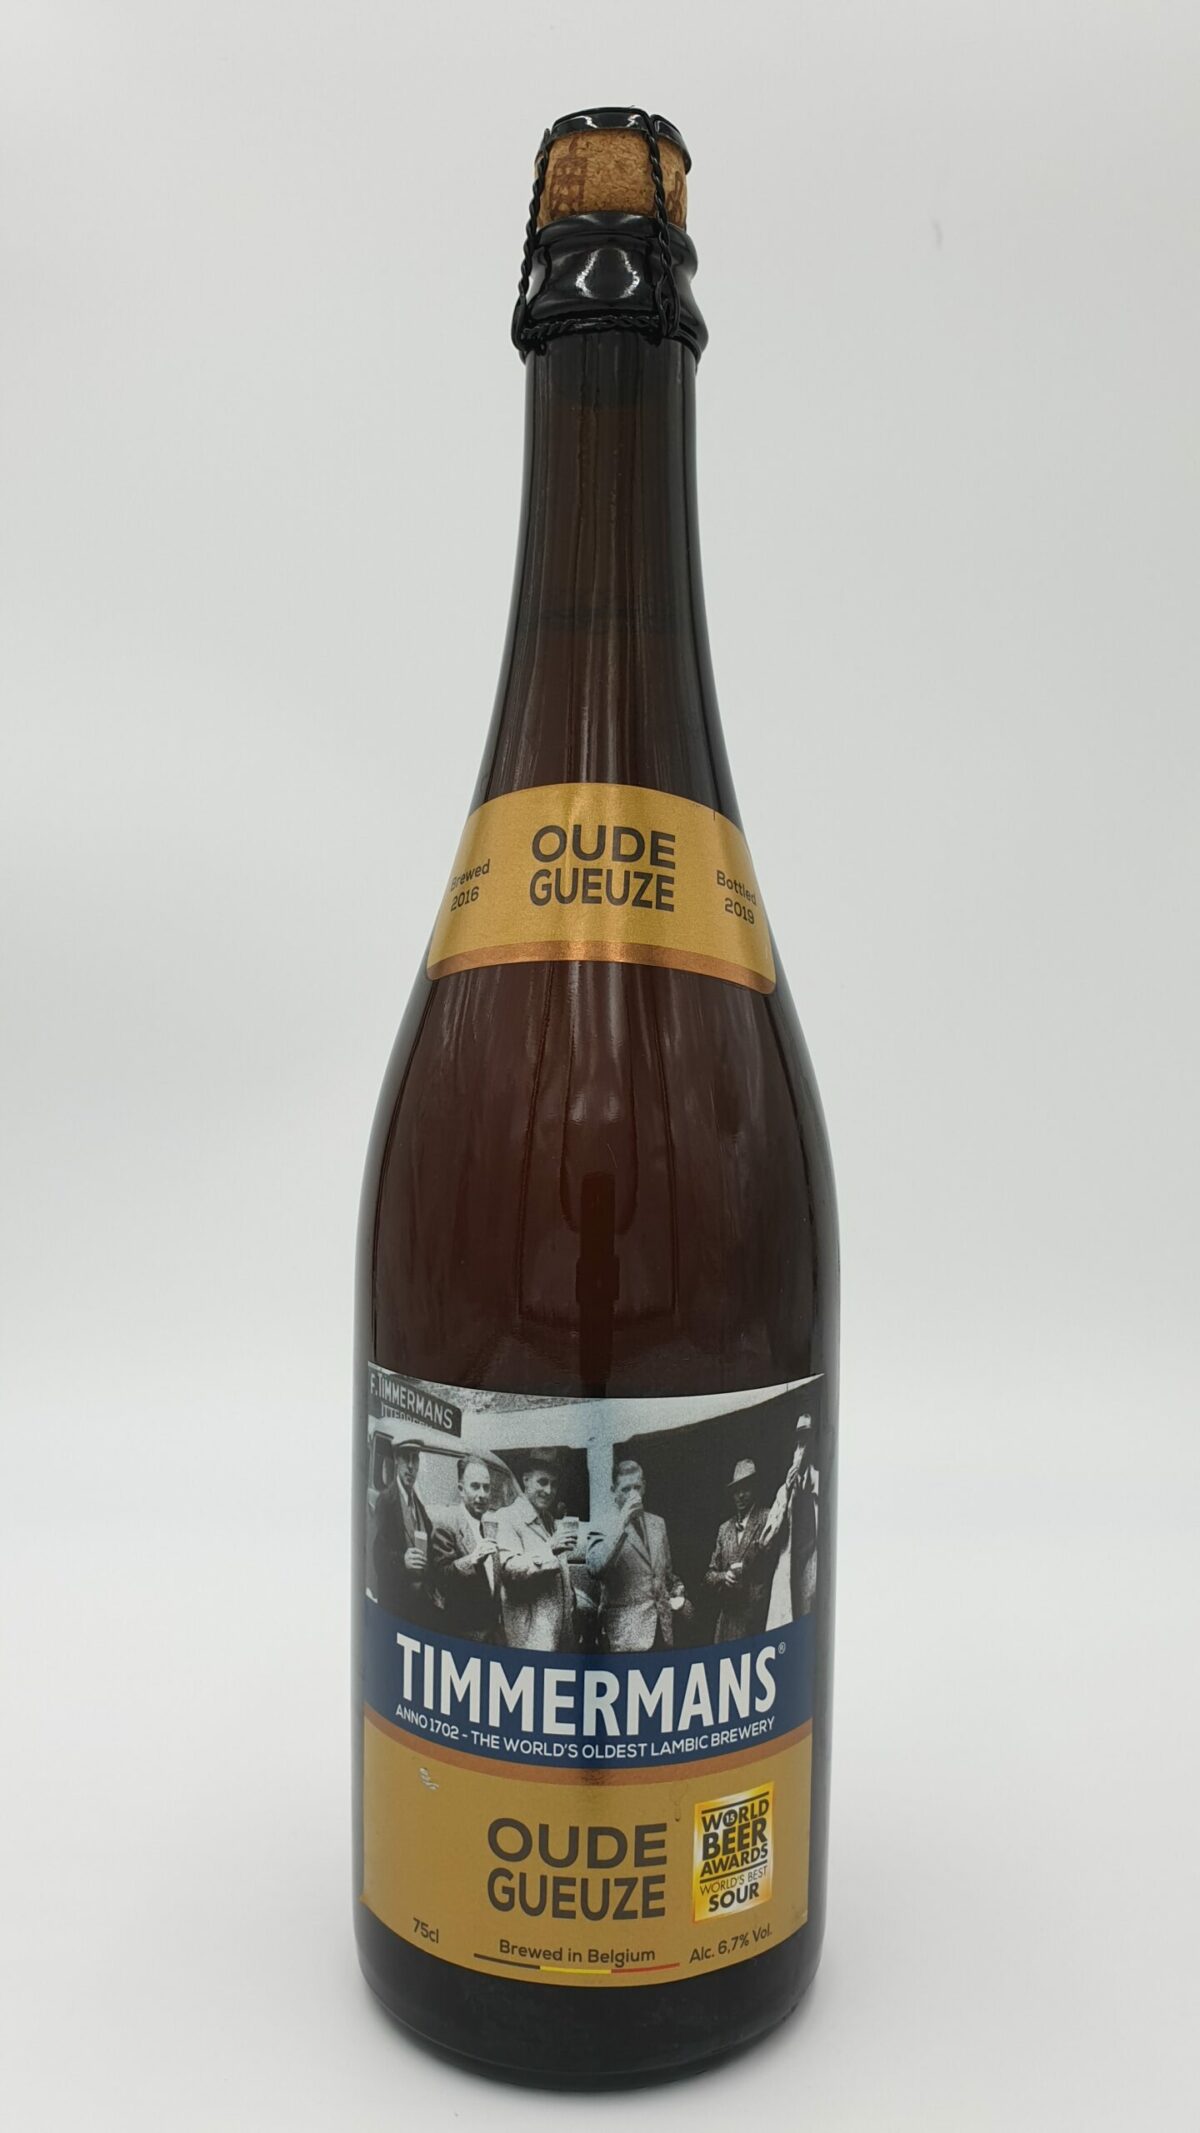 timmermans oude gueuze